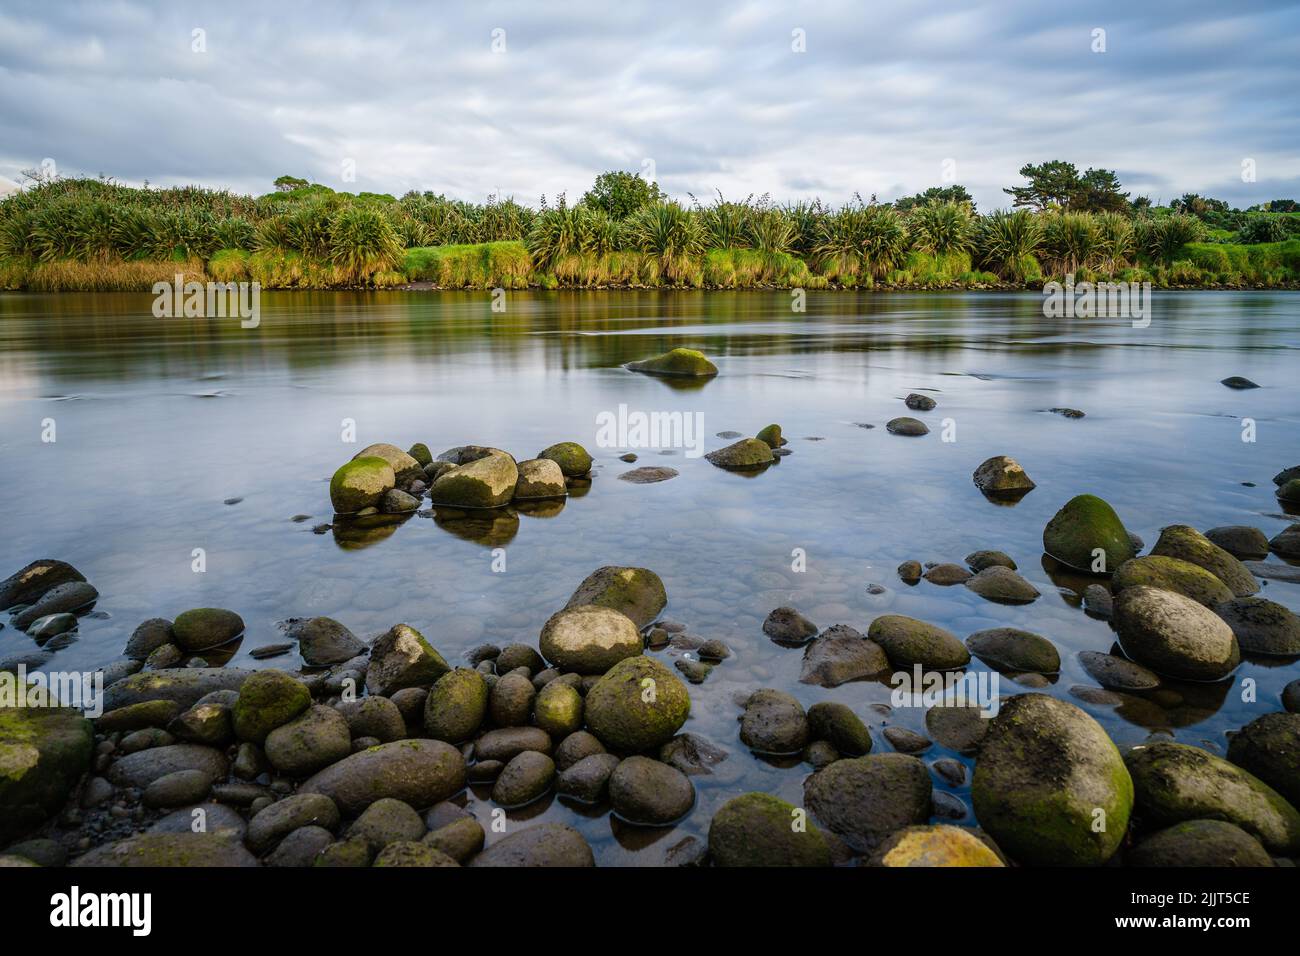 A natural view of the river filled with big rocks in New Plymouth, New Zealand Stock Photo